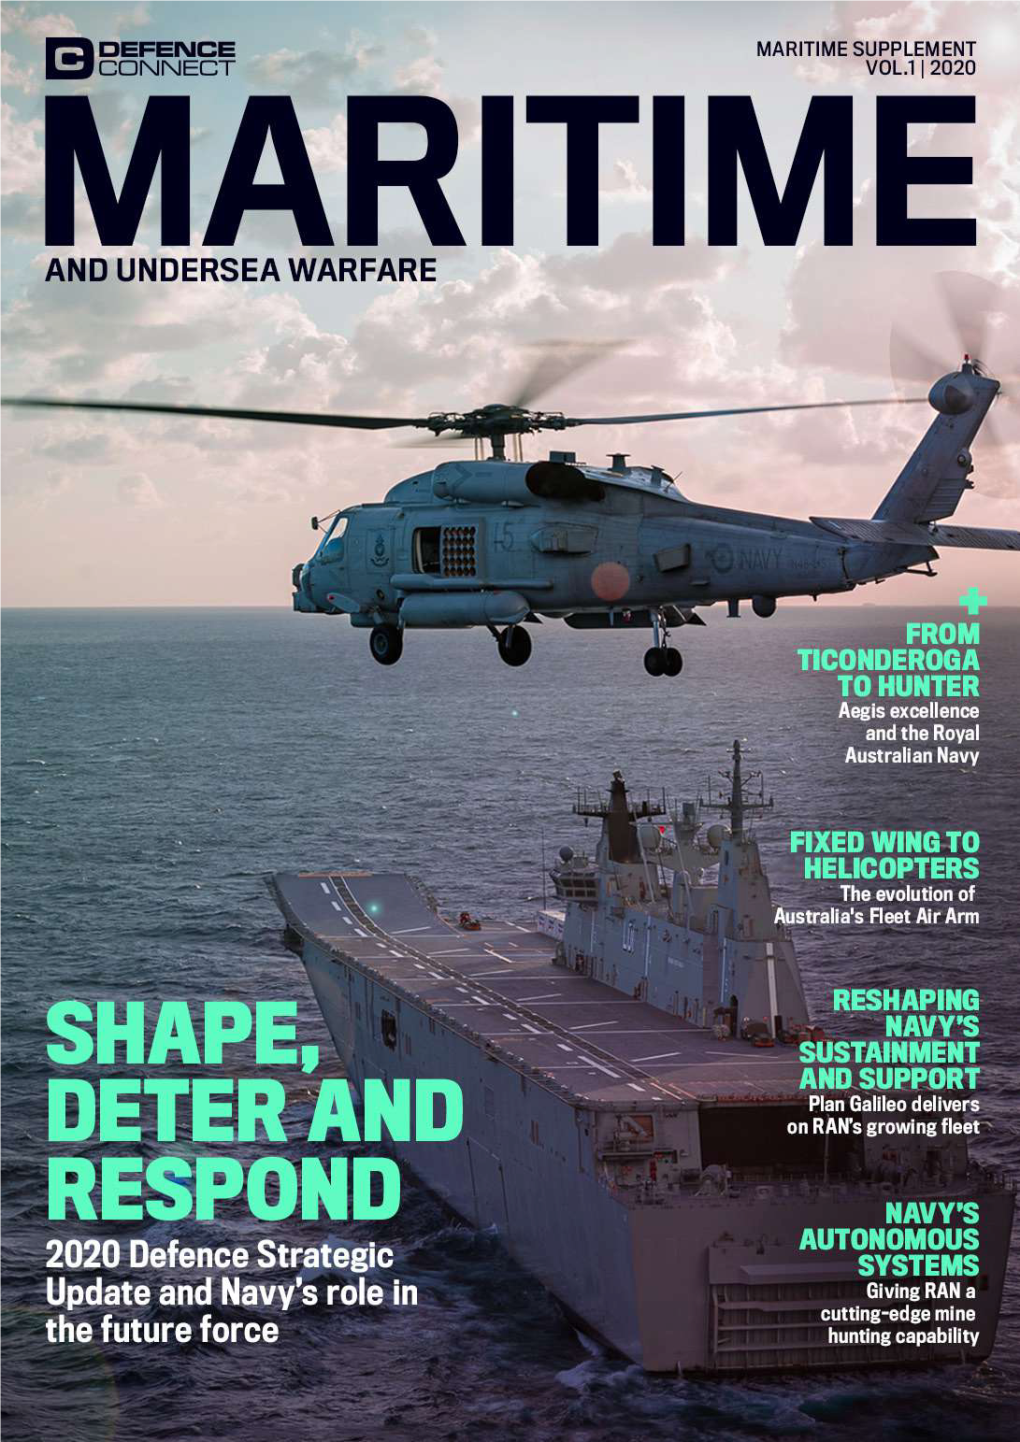 Keeping Capability Alive and Ships at Sea